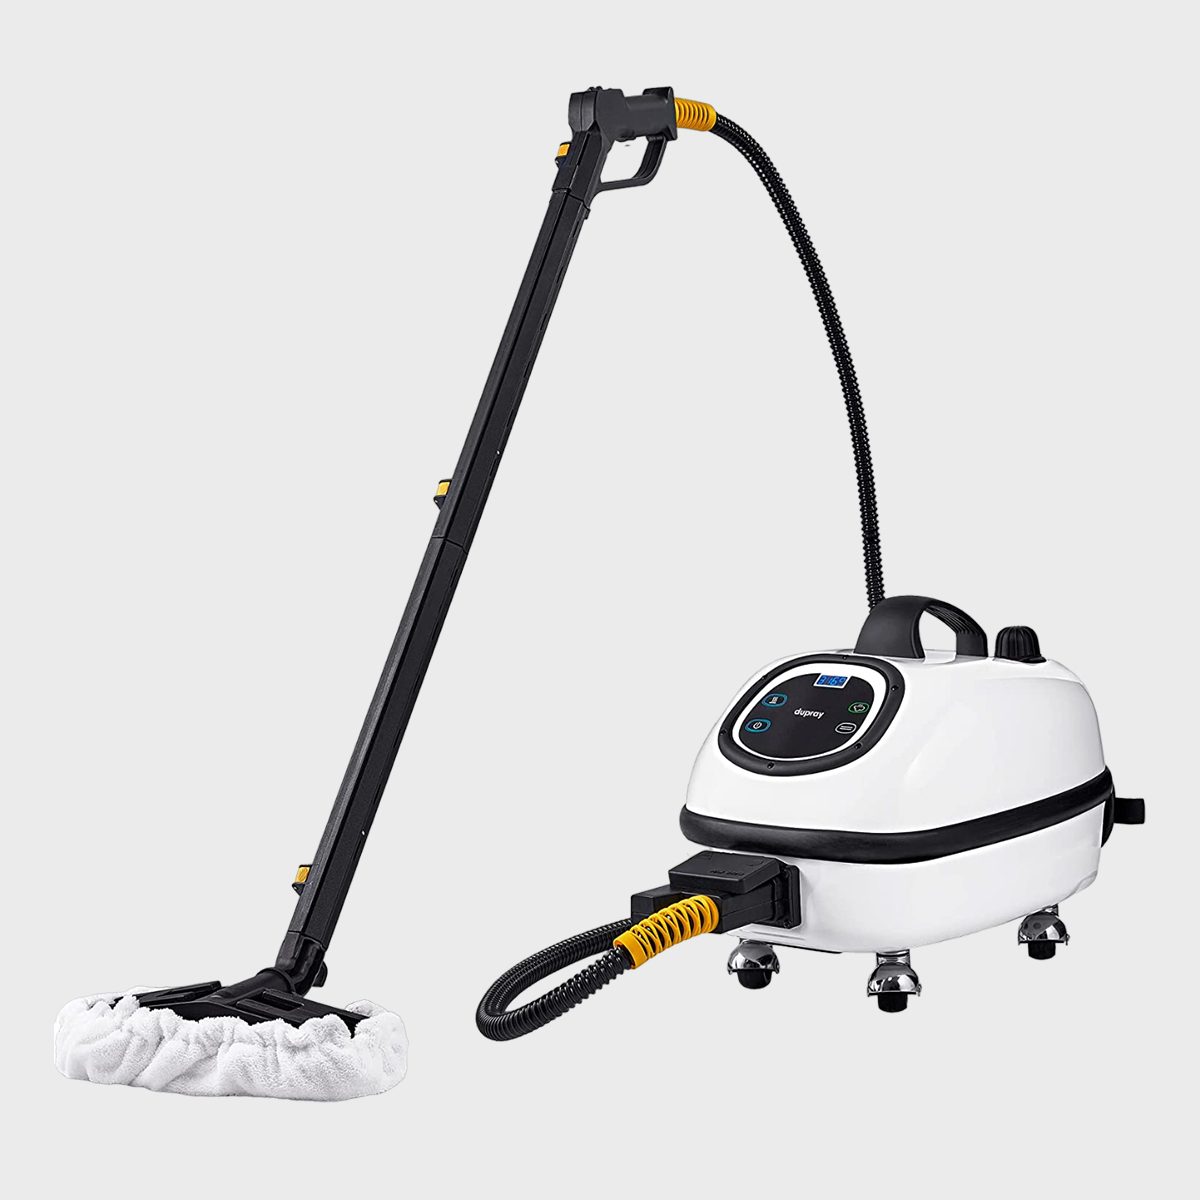 2500W Steam Cleaner, High-Pressure Steamer for Cleaning, Handheld Portable Steam Cleaners for Home Use, Steamer for Car Detailing, Steam Cleaner for